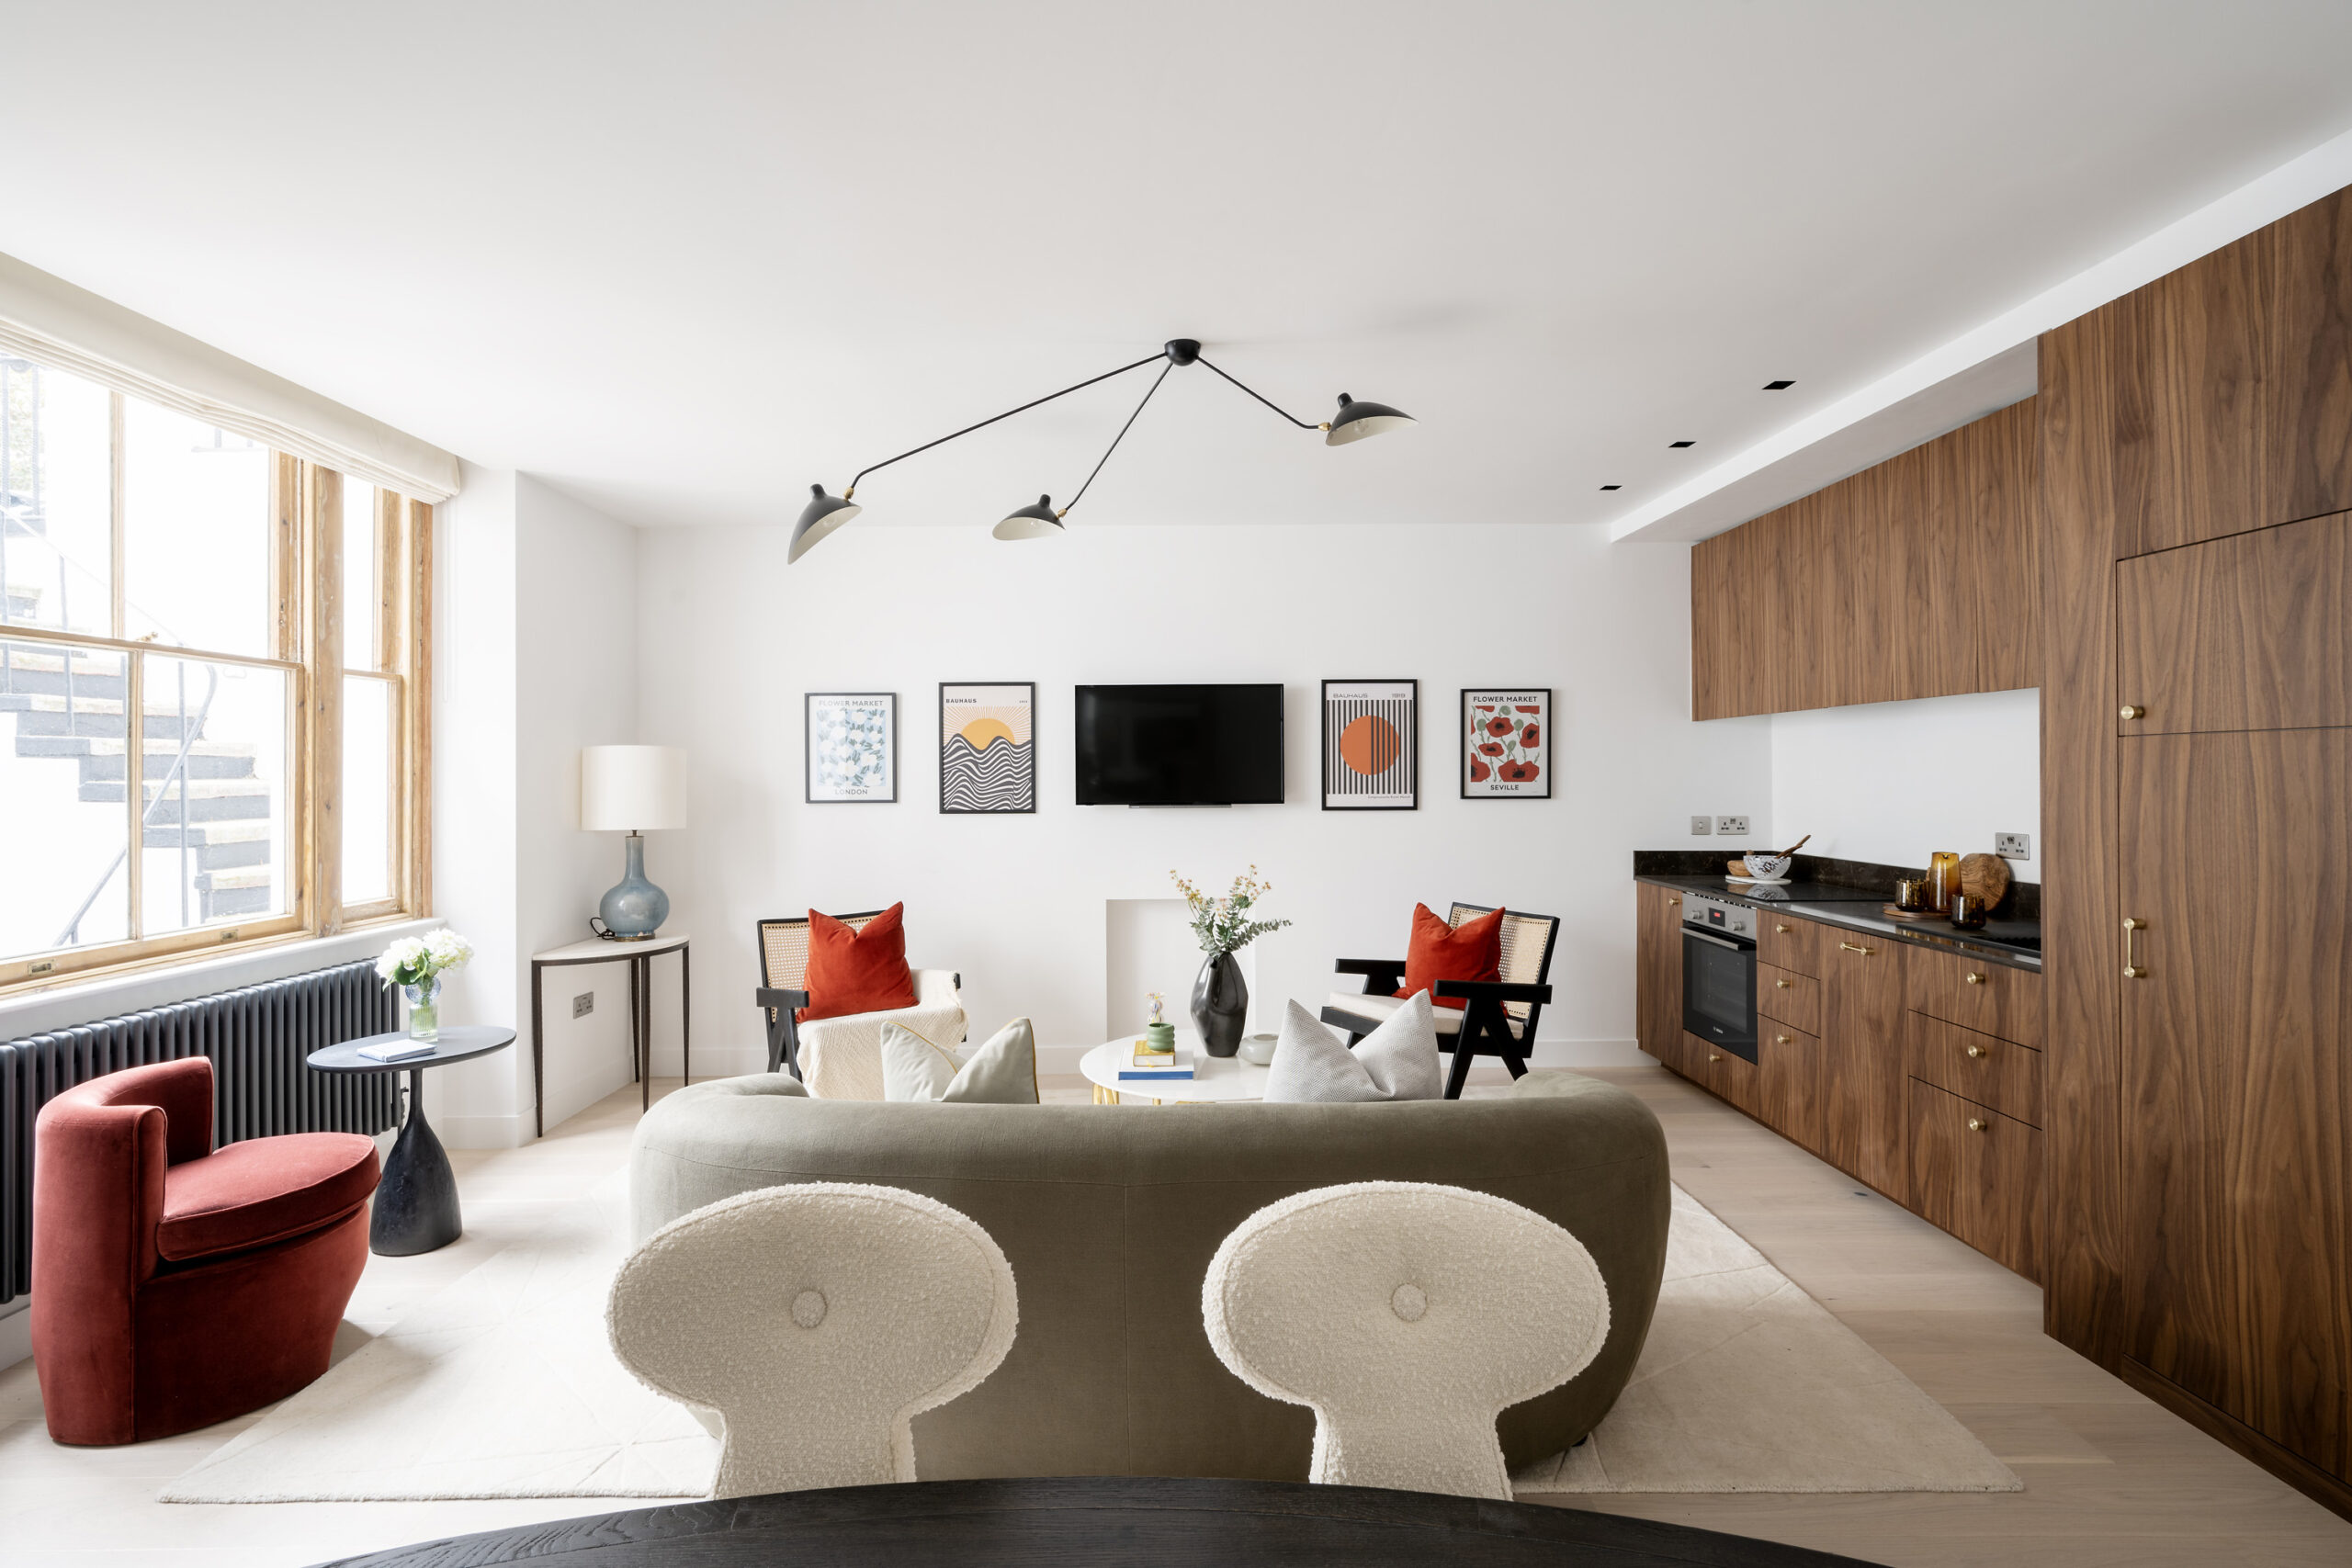 Luxury open-plan kitchen and reception room of a two-bedroom maisonette for sale in Notting Hill